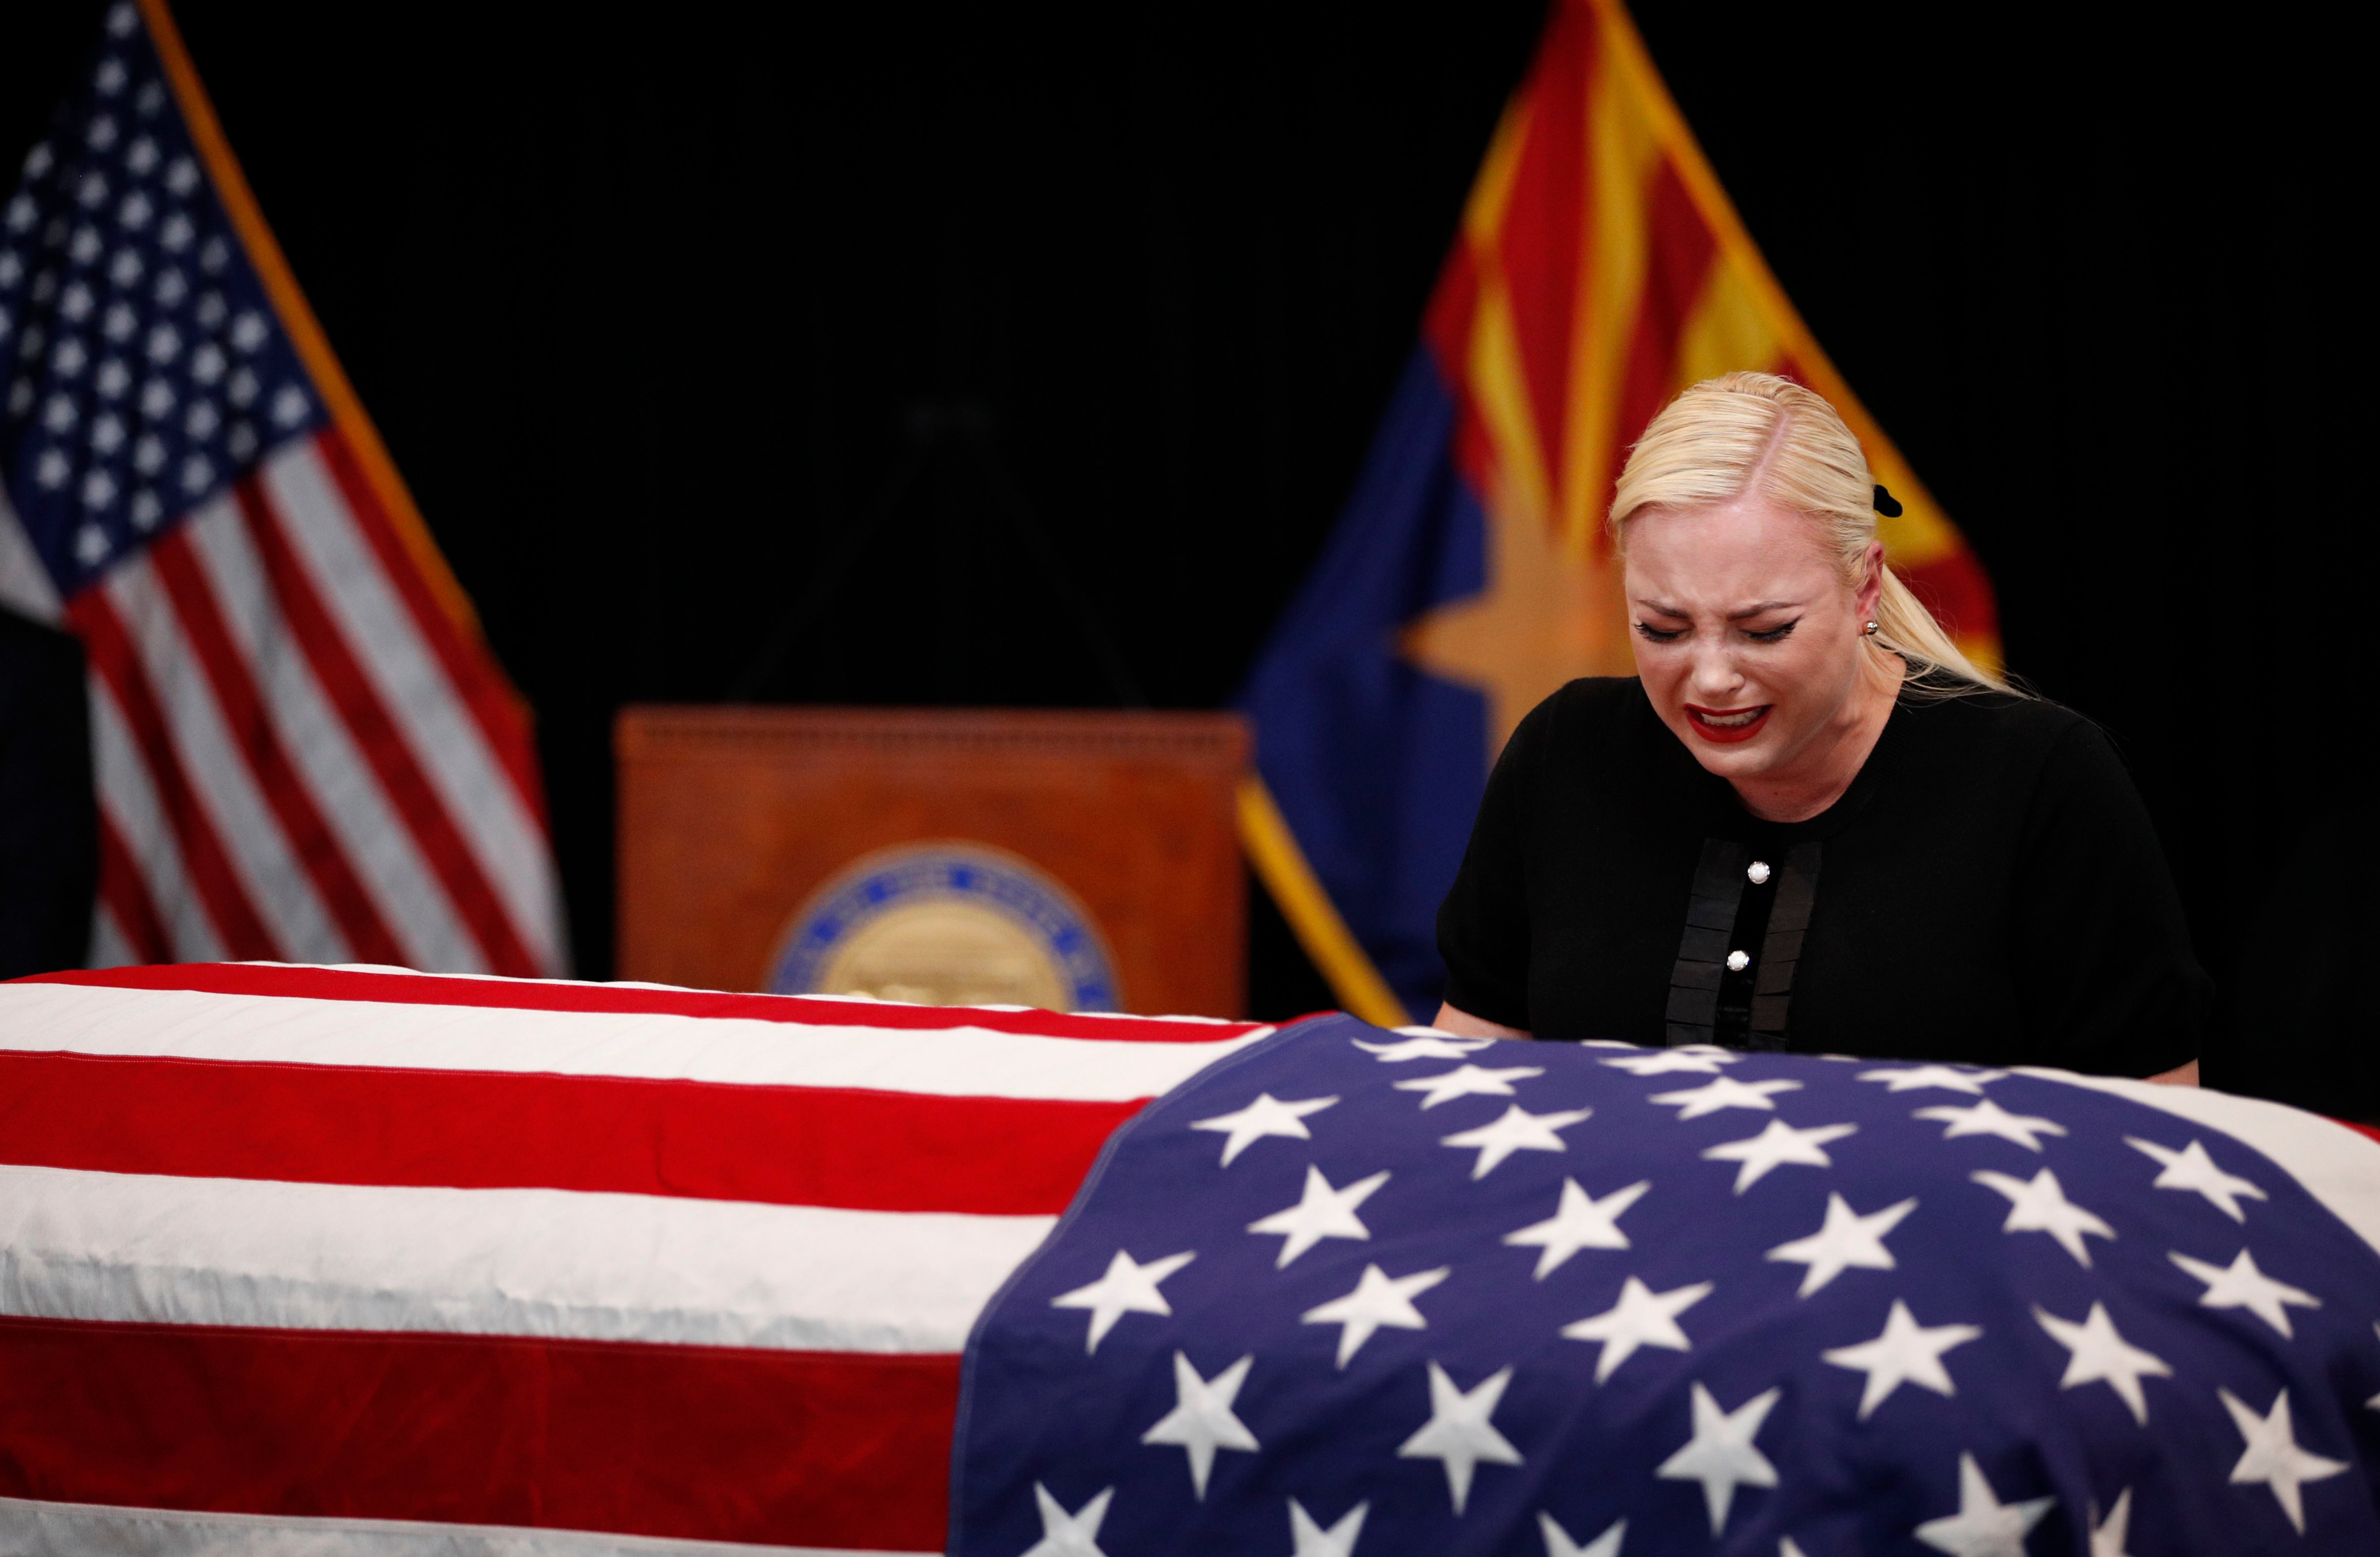 Meghan McCain, daughter of Sen. John McCain, touches the casket during a memorial service at the Arizona Capitol on August 29, 2018, in Phoenix, Arizona. John McCain will lie in state at the Arizona State Capitol before being transported to Washington D.C. where he will be buried at the U.S. Naval Academy Cemetery in Annapolis. Sen. McCain, a decorated war hero, died August 25 at the age of 81 after a long battle with Glioblastoma, a form of brain cancer. (Jae C. Hong - Pool/Getty Images)